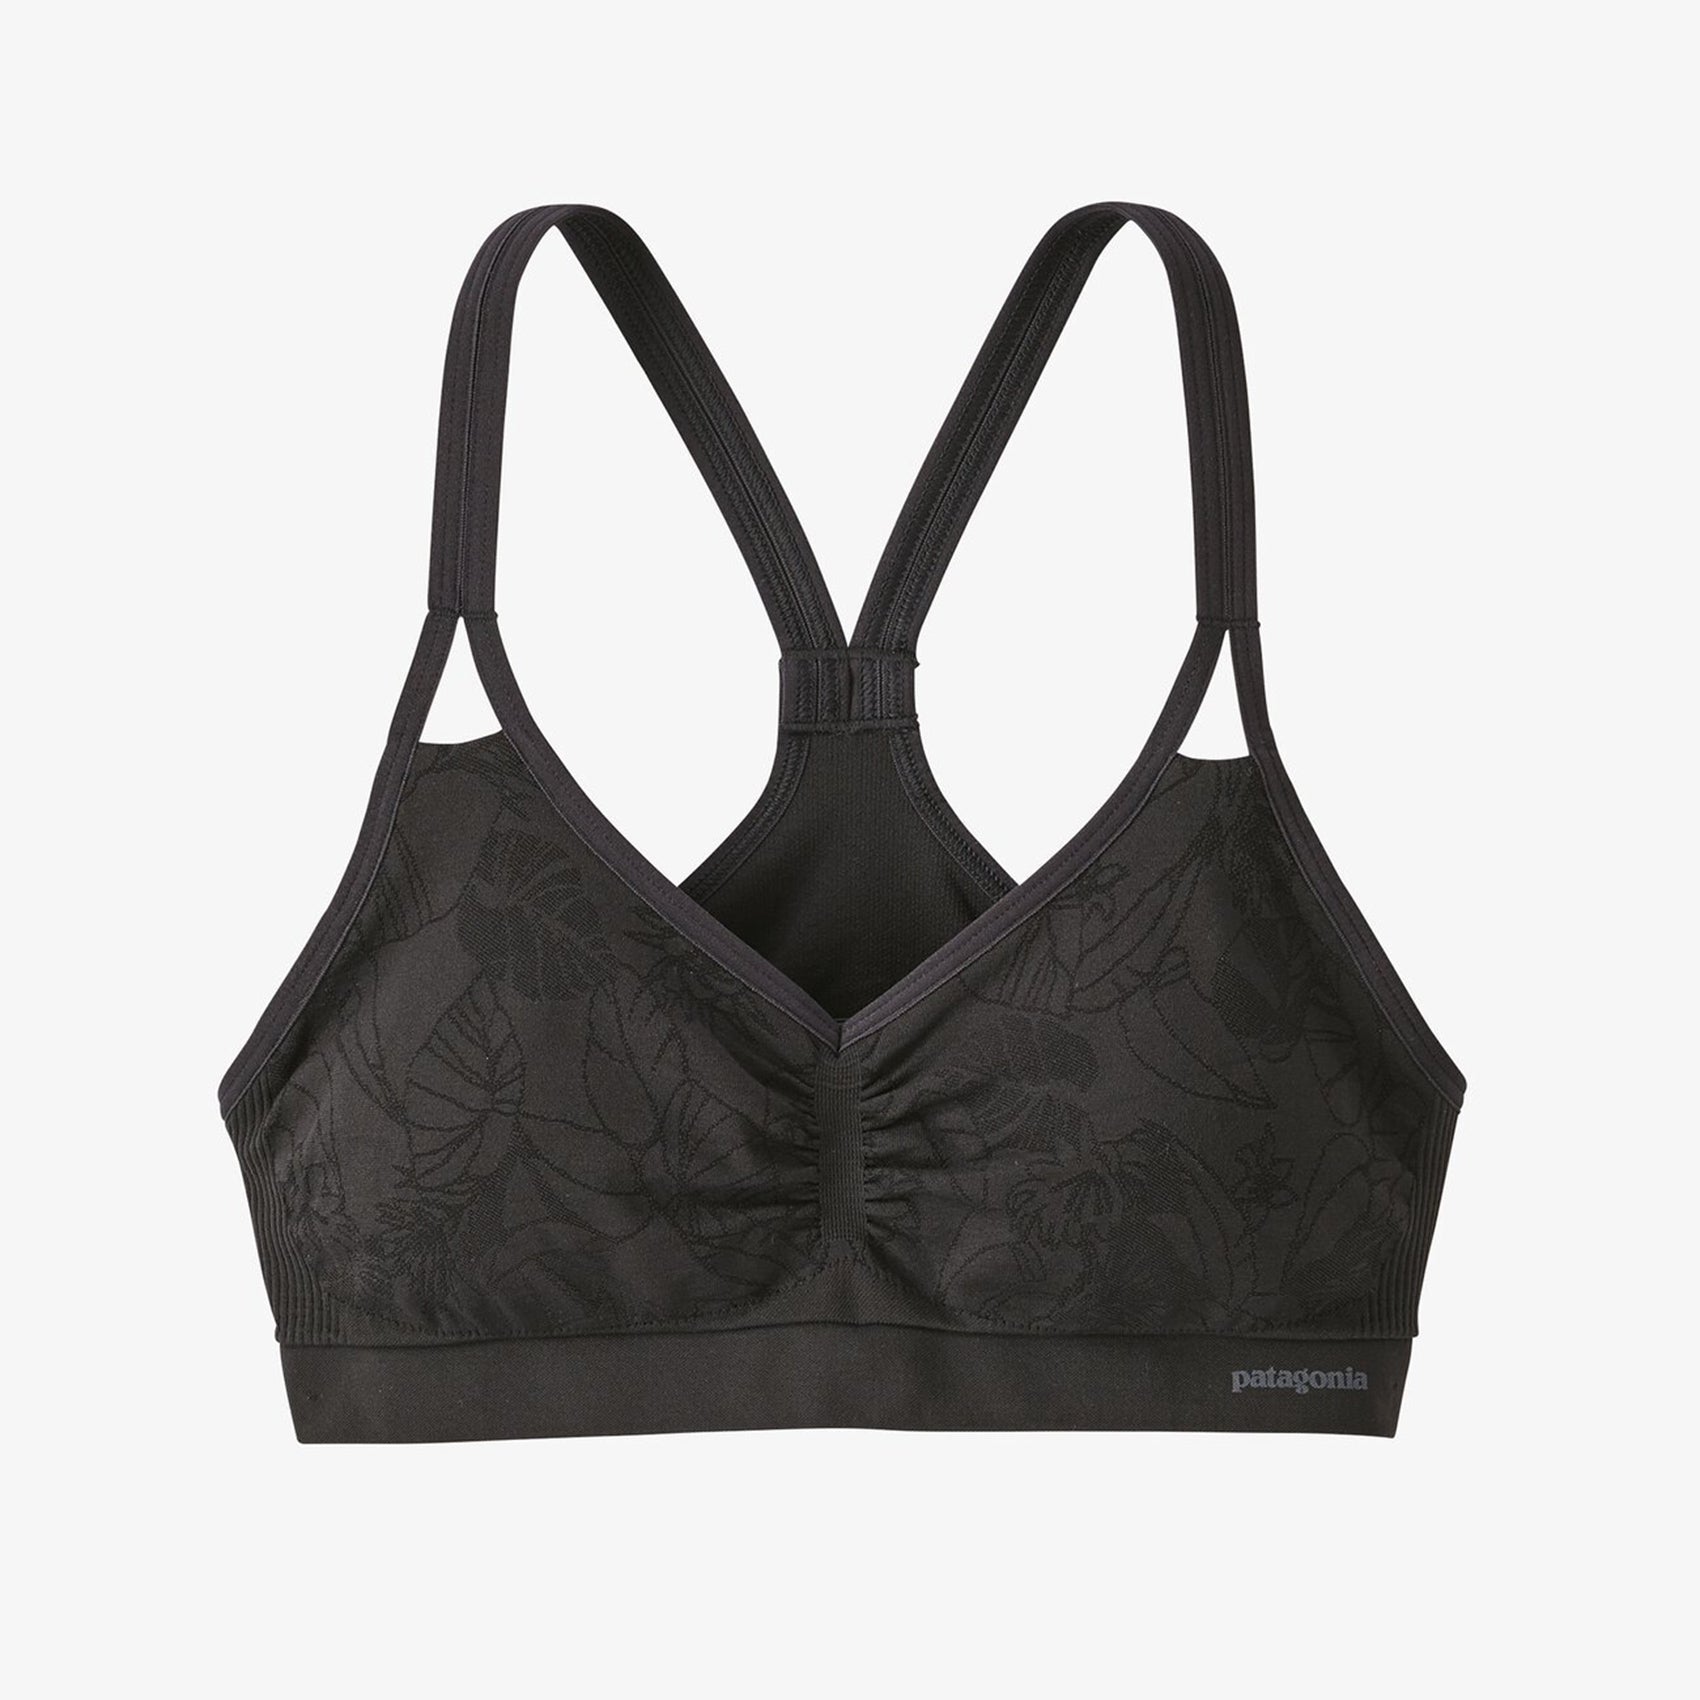 patagonia womens barely bra in valley flora jacquard black